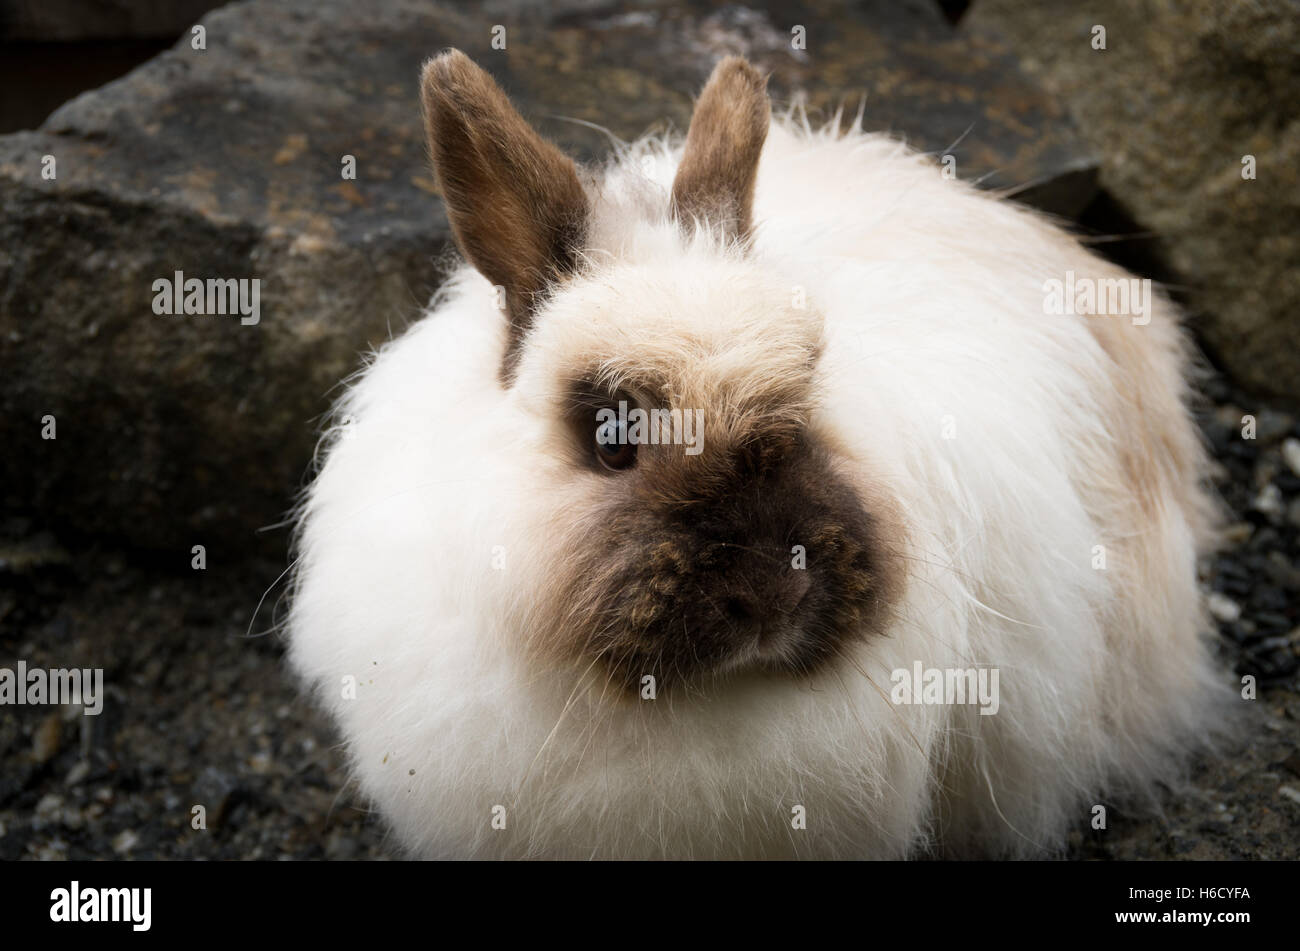 Long Haired White Brown Rabbit High Resolution Stock Photography and Images  - Alamy